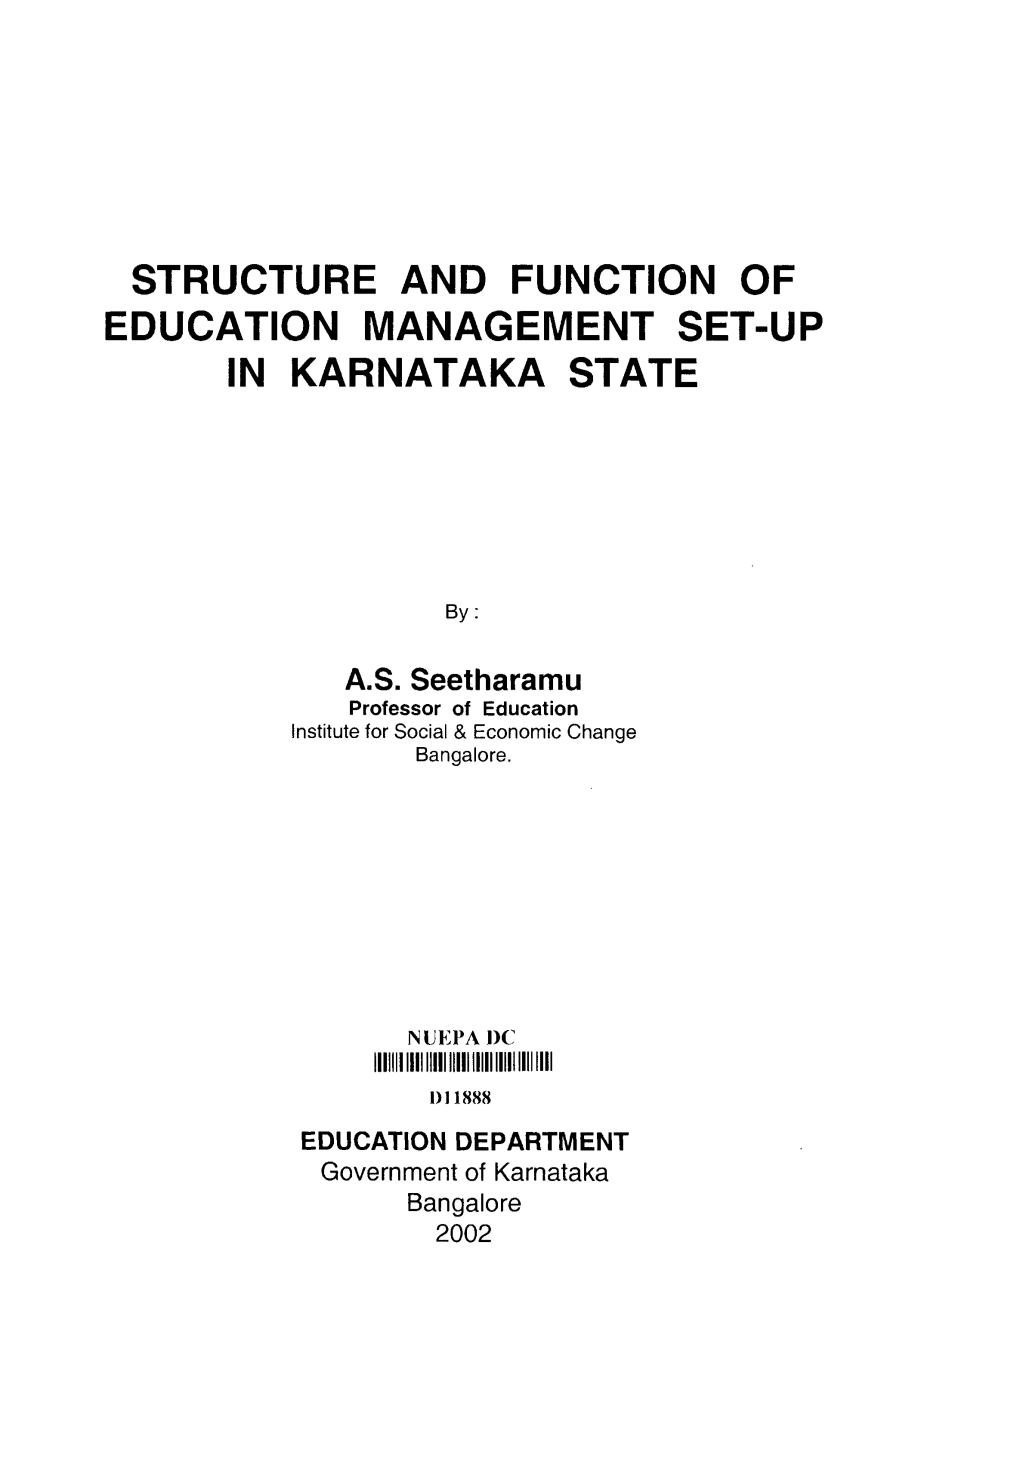 Structure and Function of Education Management Set-Up in Karnataka State